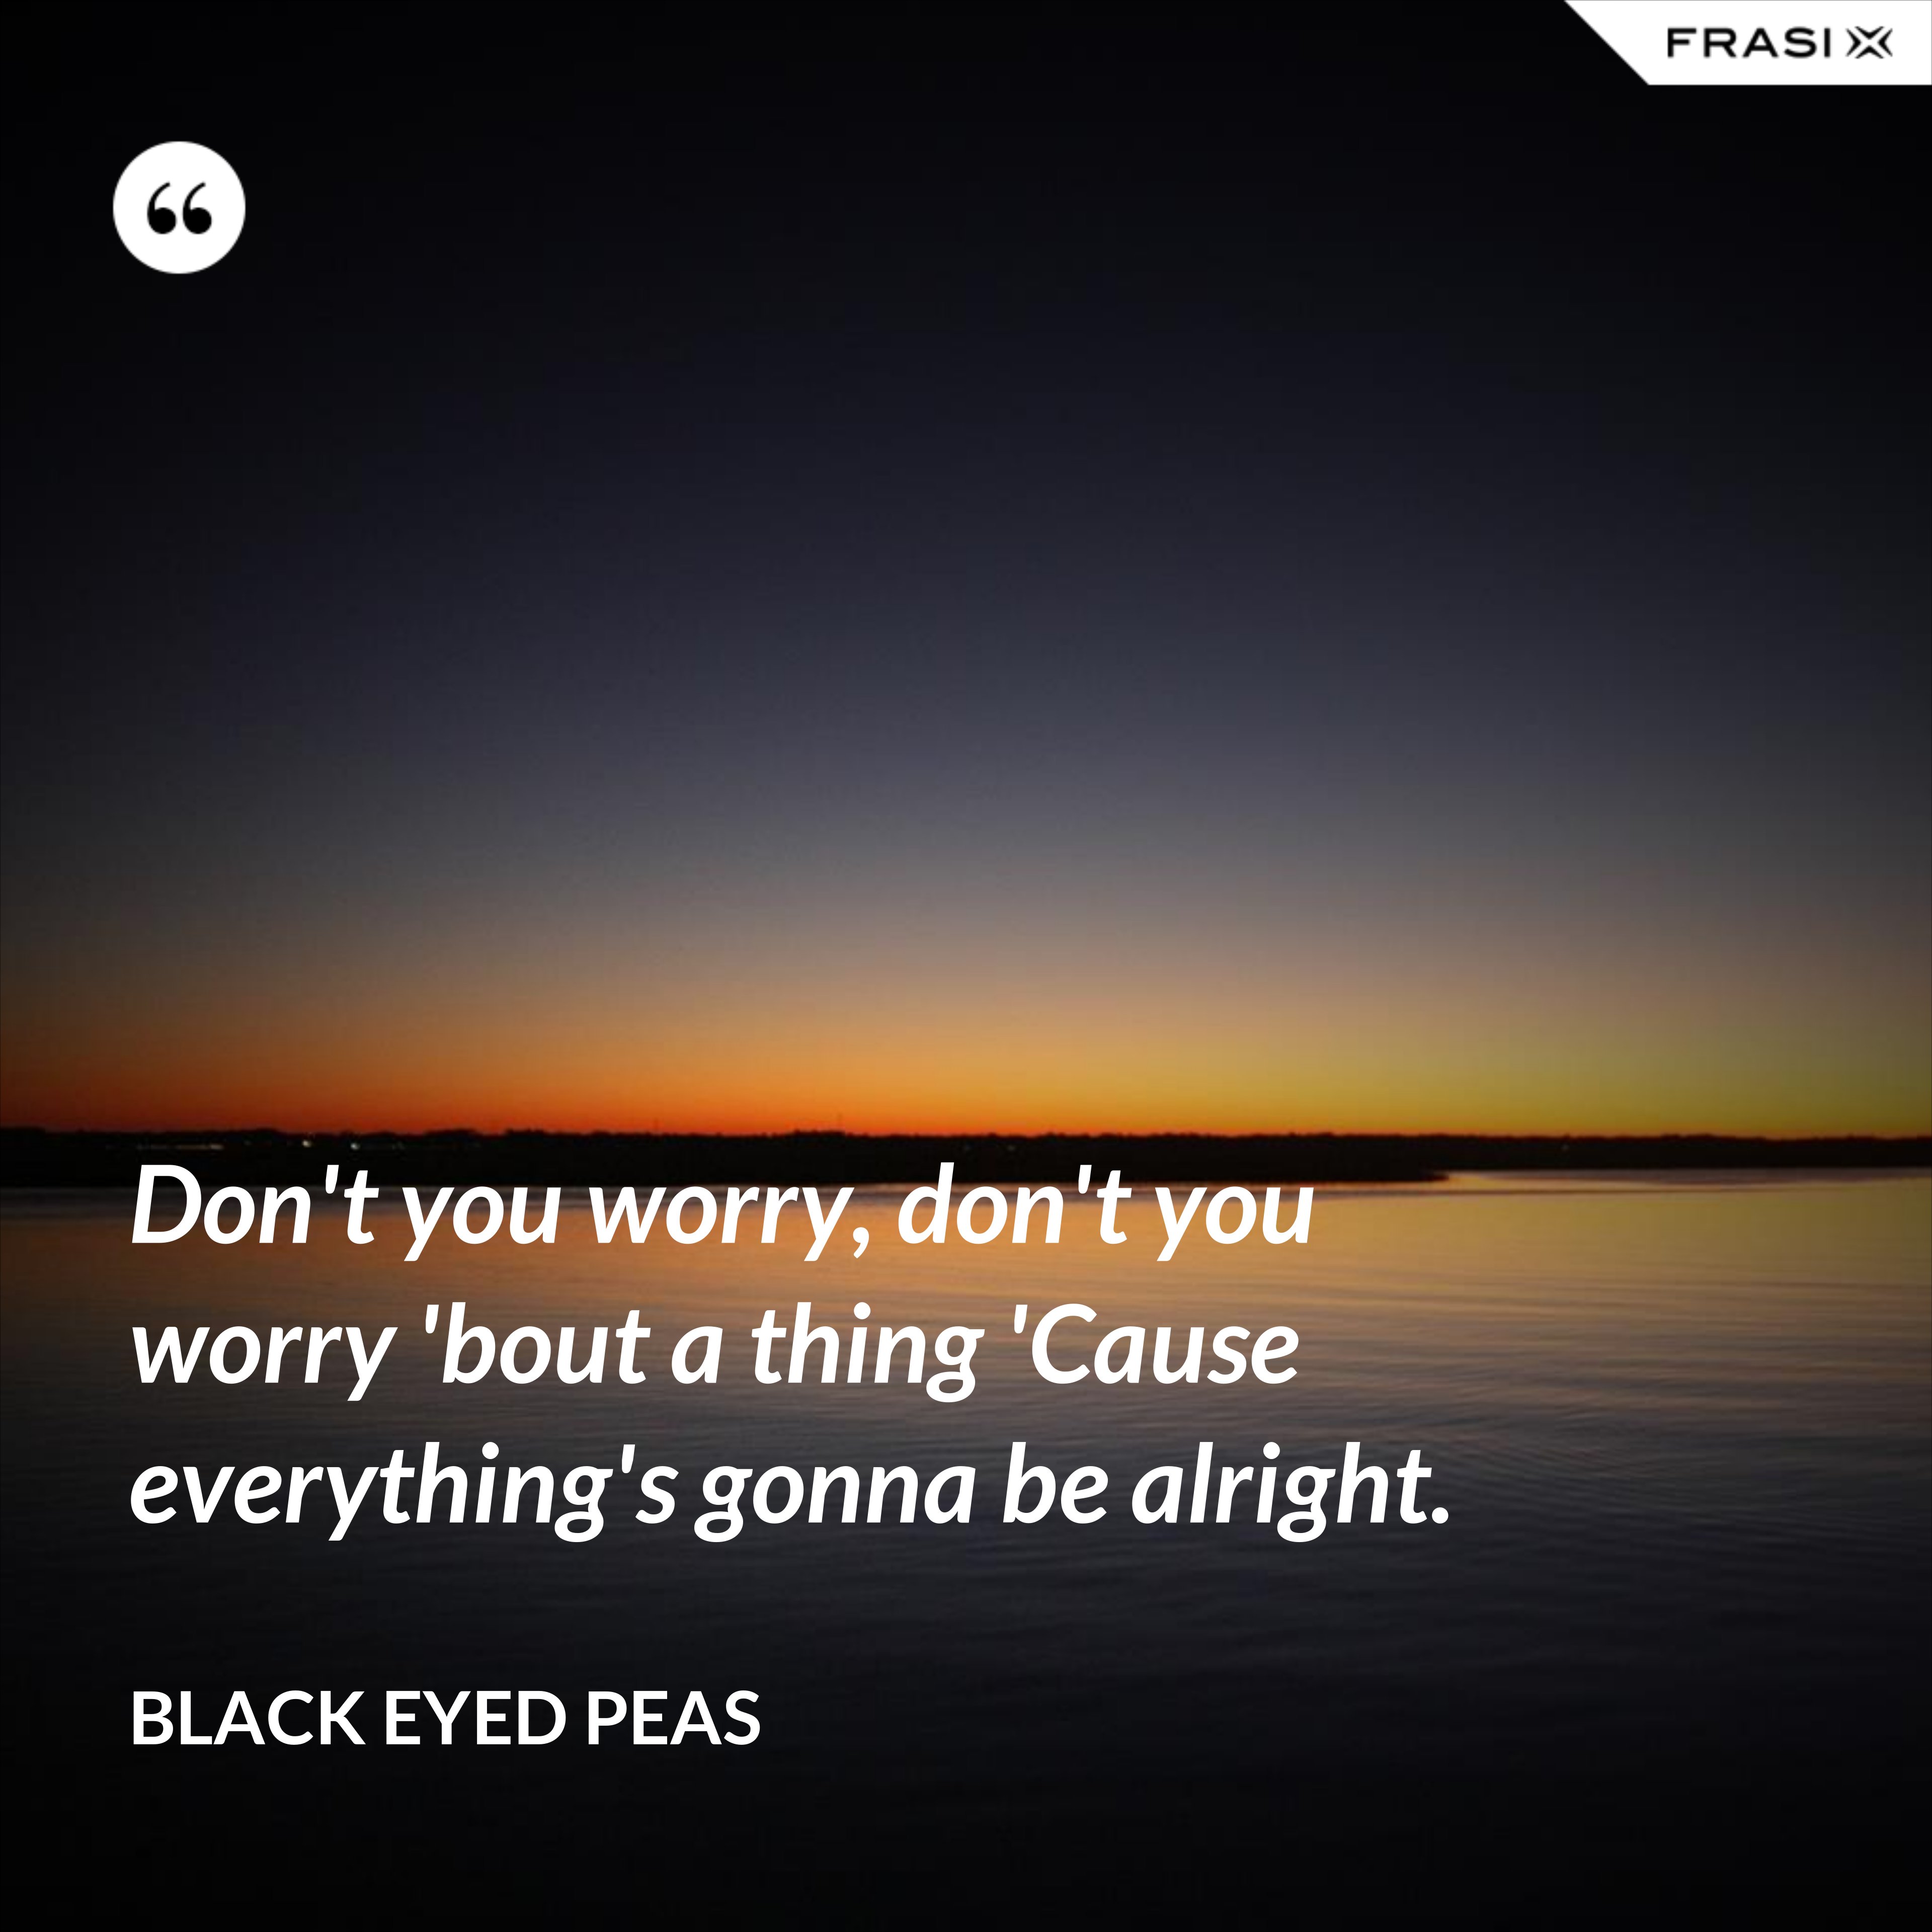 Don't you worry, don't you worry 'bout a thing 'Cause everything's gonna be alright. - Black Eyed Peas